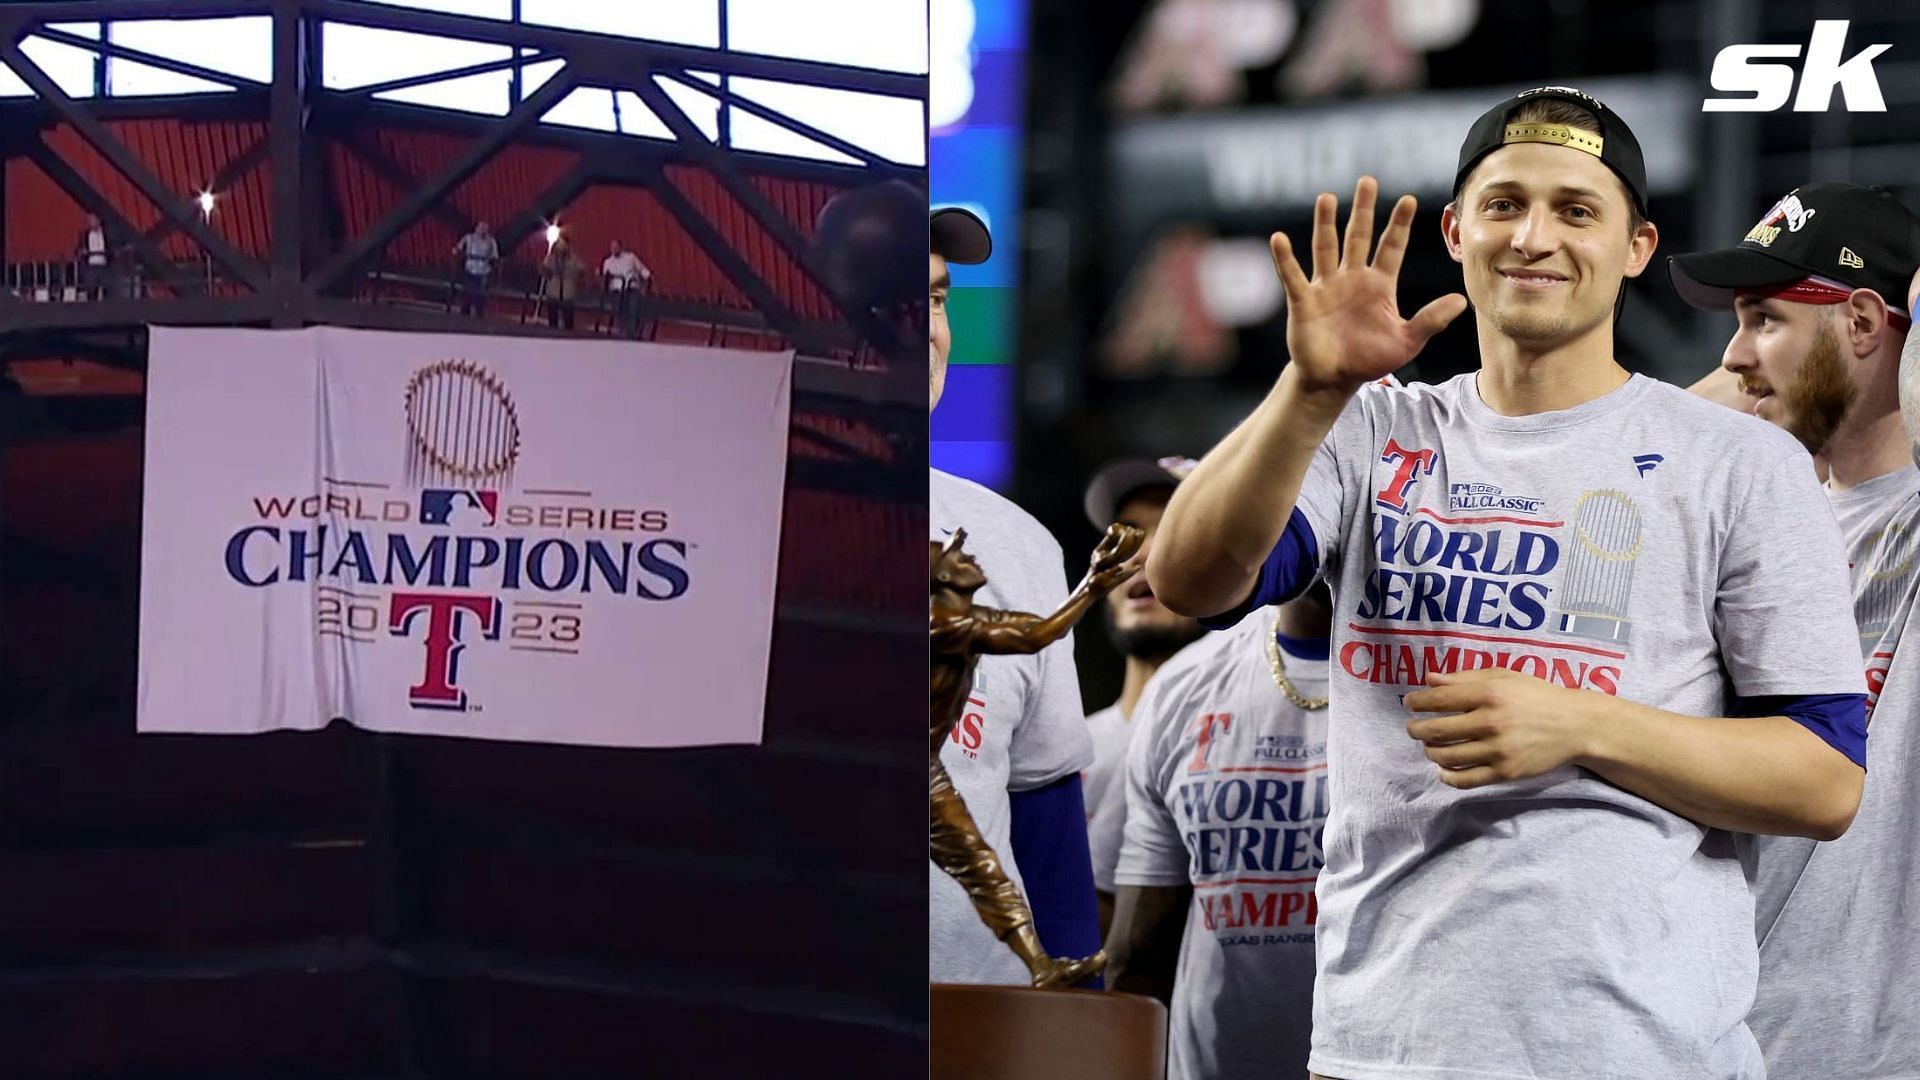 MLB fans are trolling the Texas Rangers World Series banner they unveiled on Opening Day